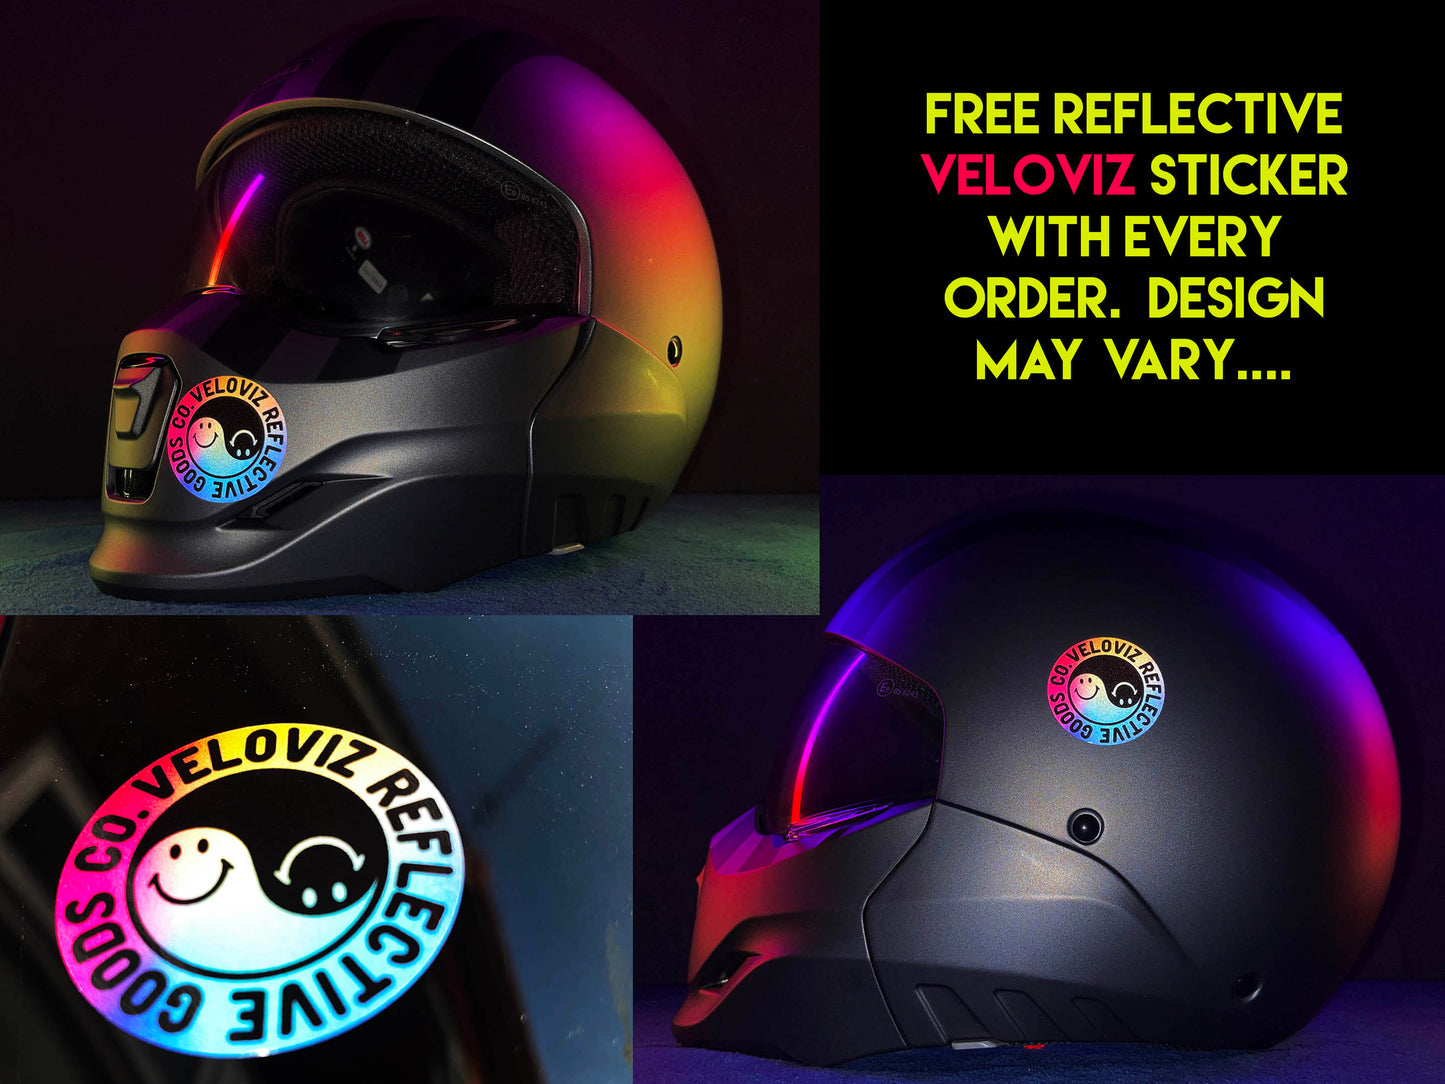 Valueviz Reflective Rounded Motorcycle Helmet Stickers (French Compliant)